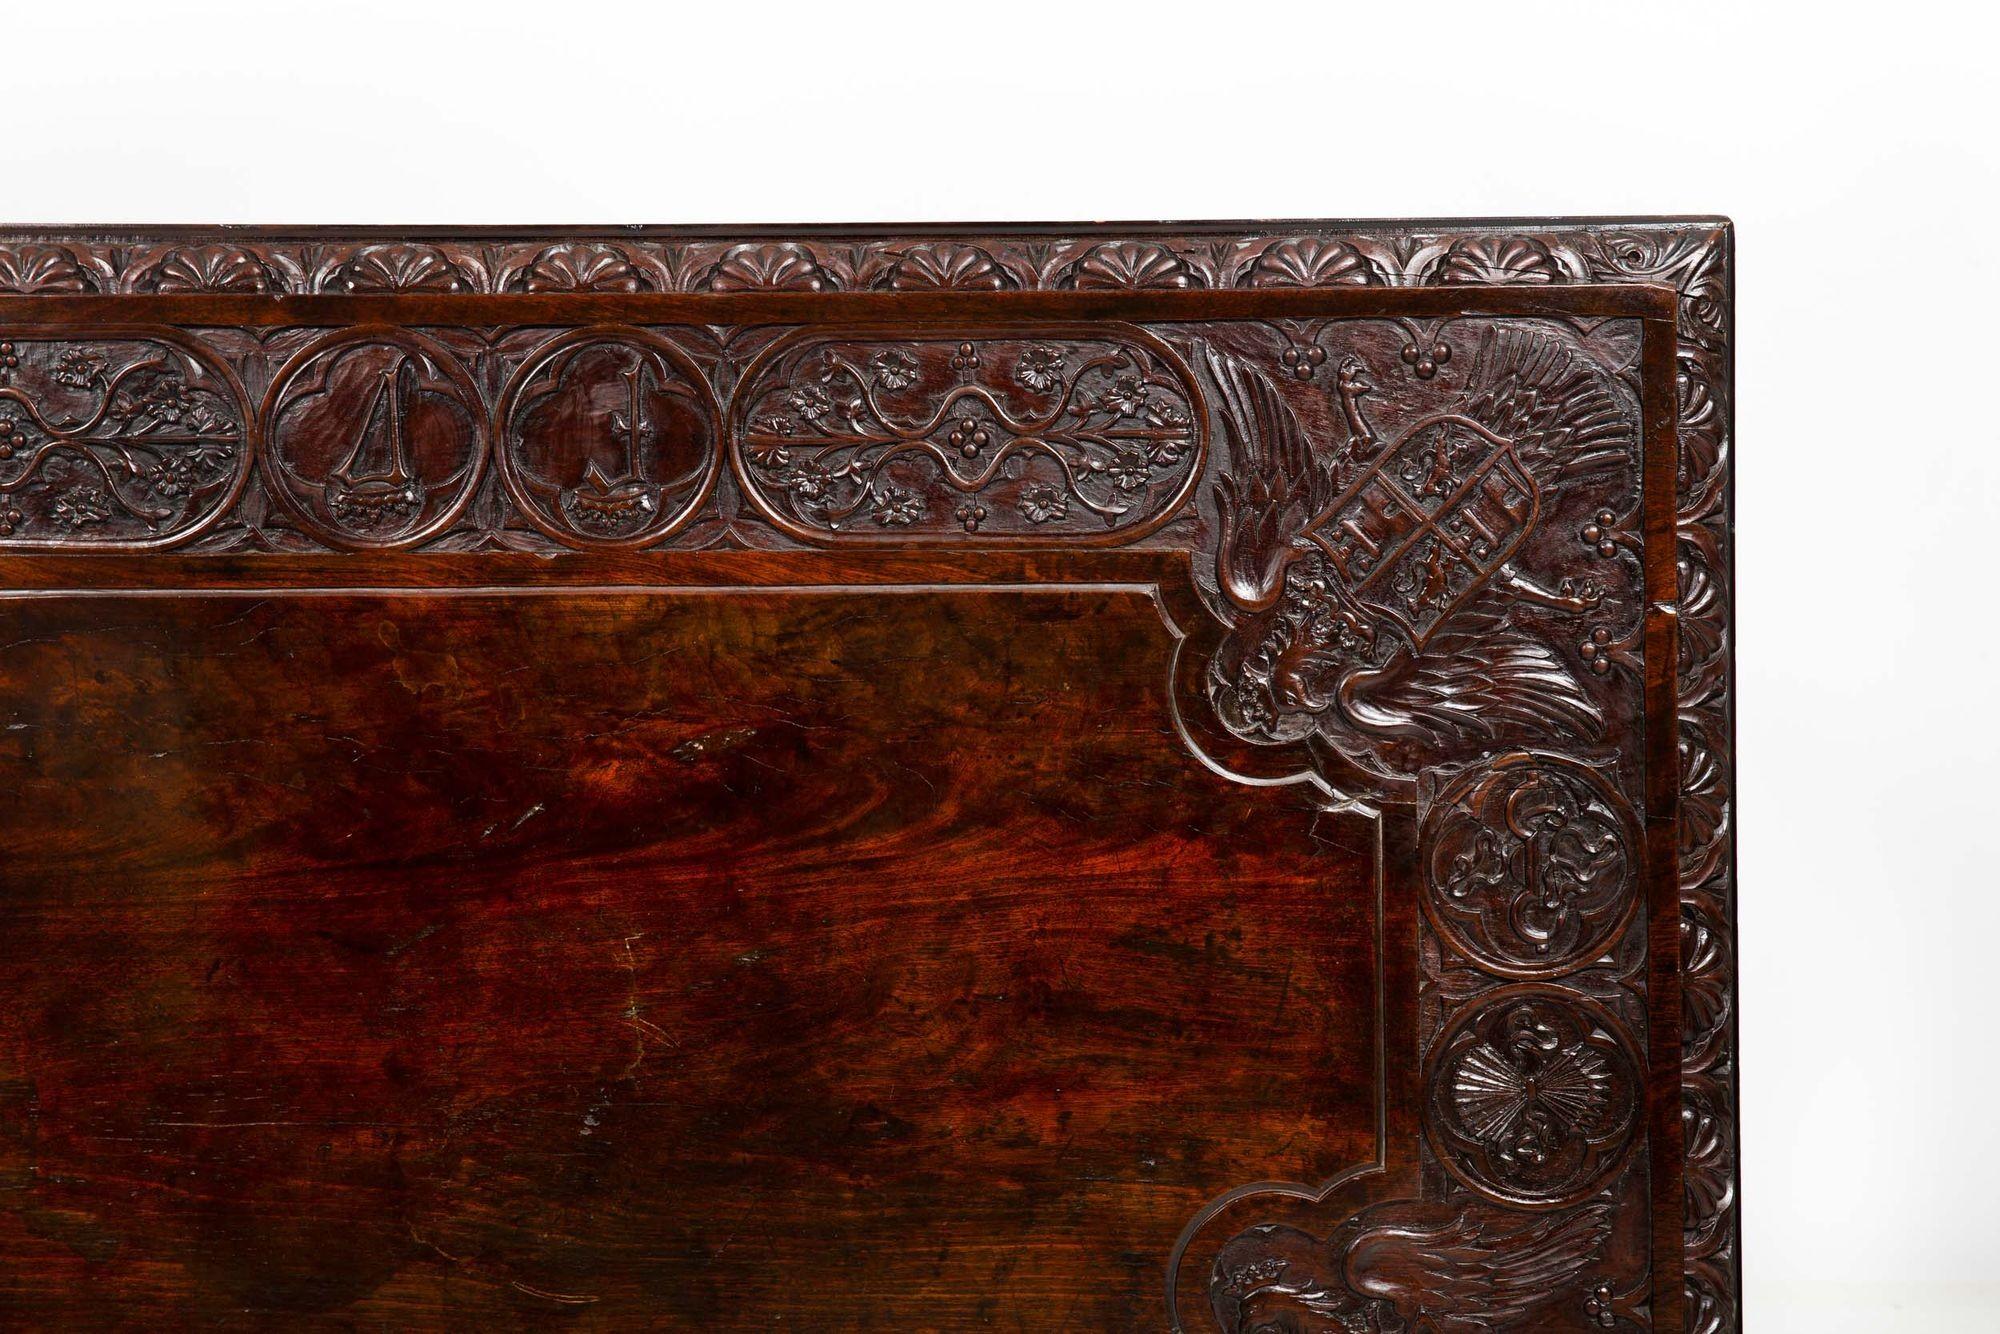 Circa 1900 Gothic Revival Antique Carved Walnut Library Table For Sale 9